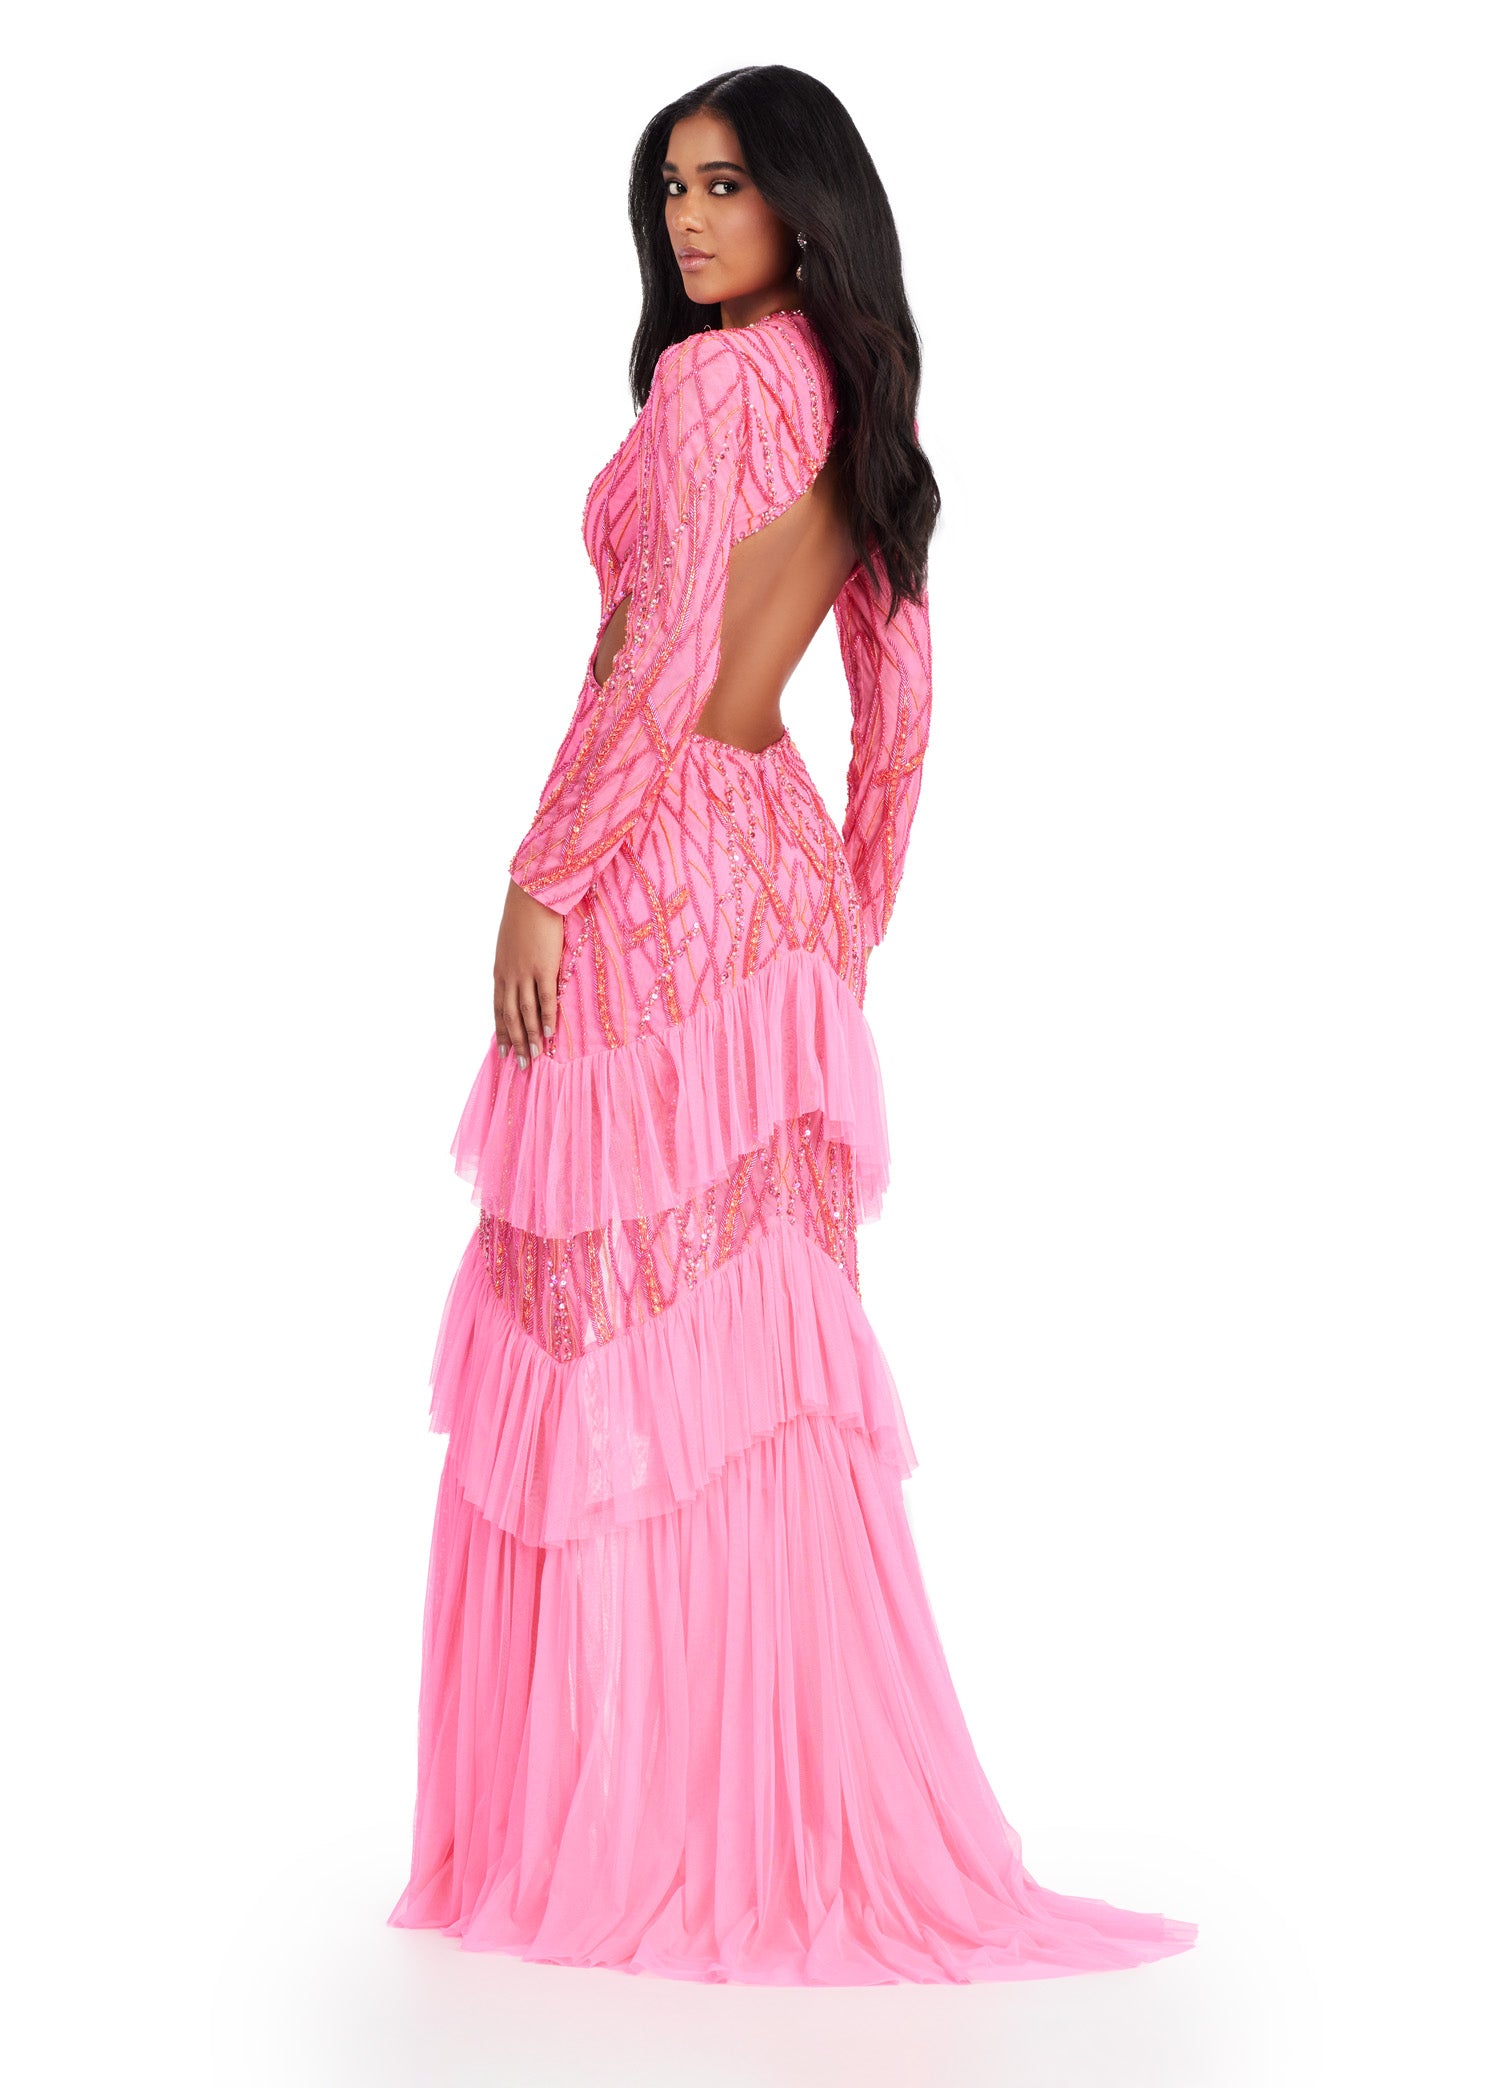 Step into elegance with the Ashley Lauren 11436 Long Prom Dress. This stunning gown features delicate beading, a flattering V-neckline, and a daring center slit with ruffled detailing. With its long sleeves, this dress is the perfect choice for a cool evening event. Make a statement in this formal gown. Fall in love with this gorgeous fully beaded long sleeve gown. Featuring an open back and center slit, this dress embodies effortless allure!